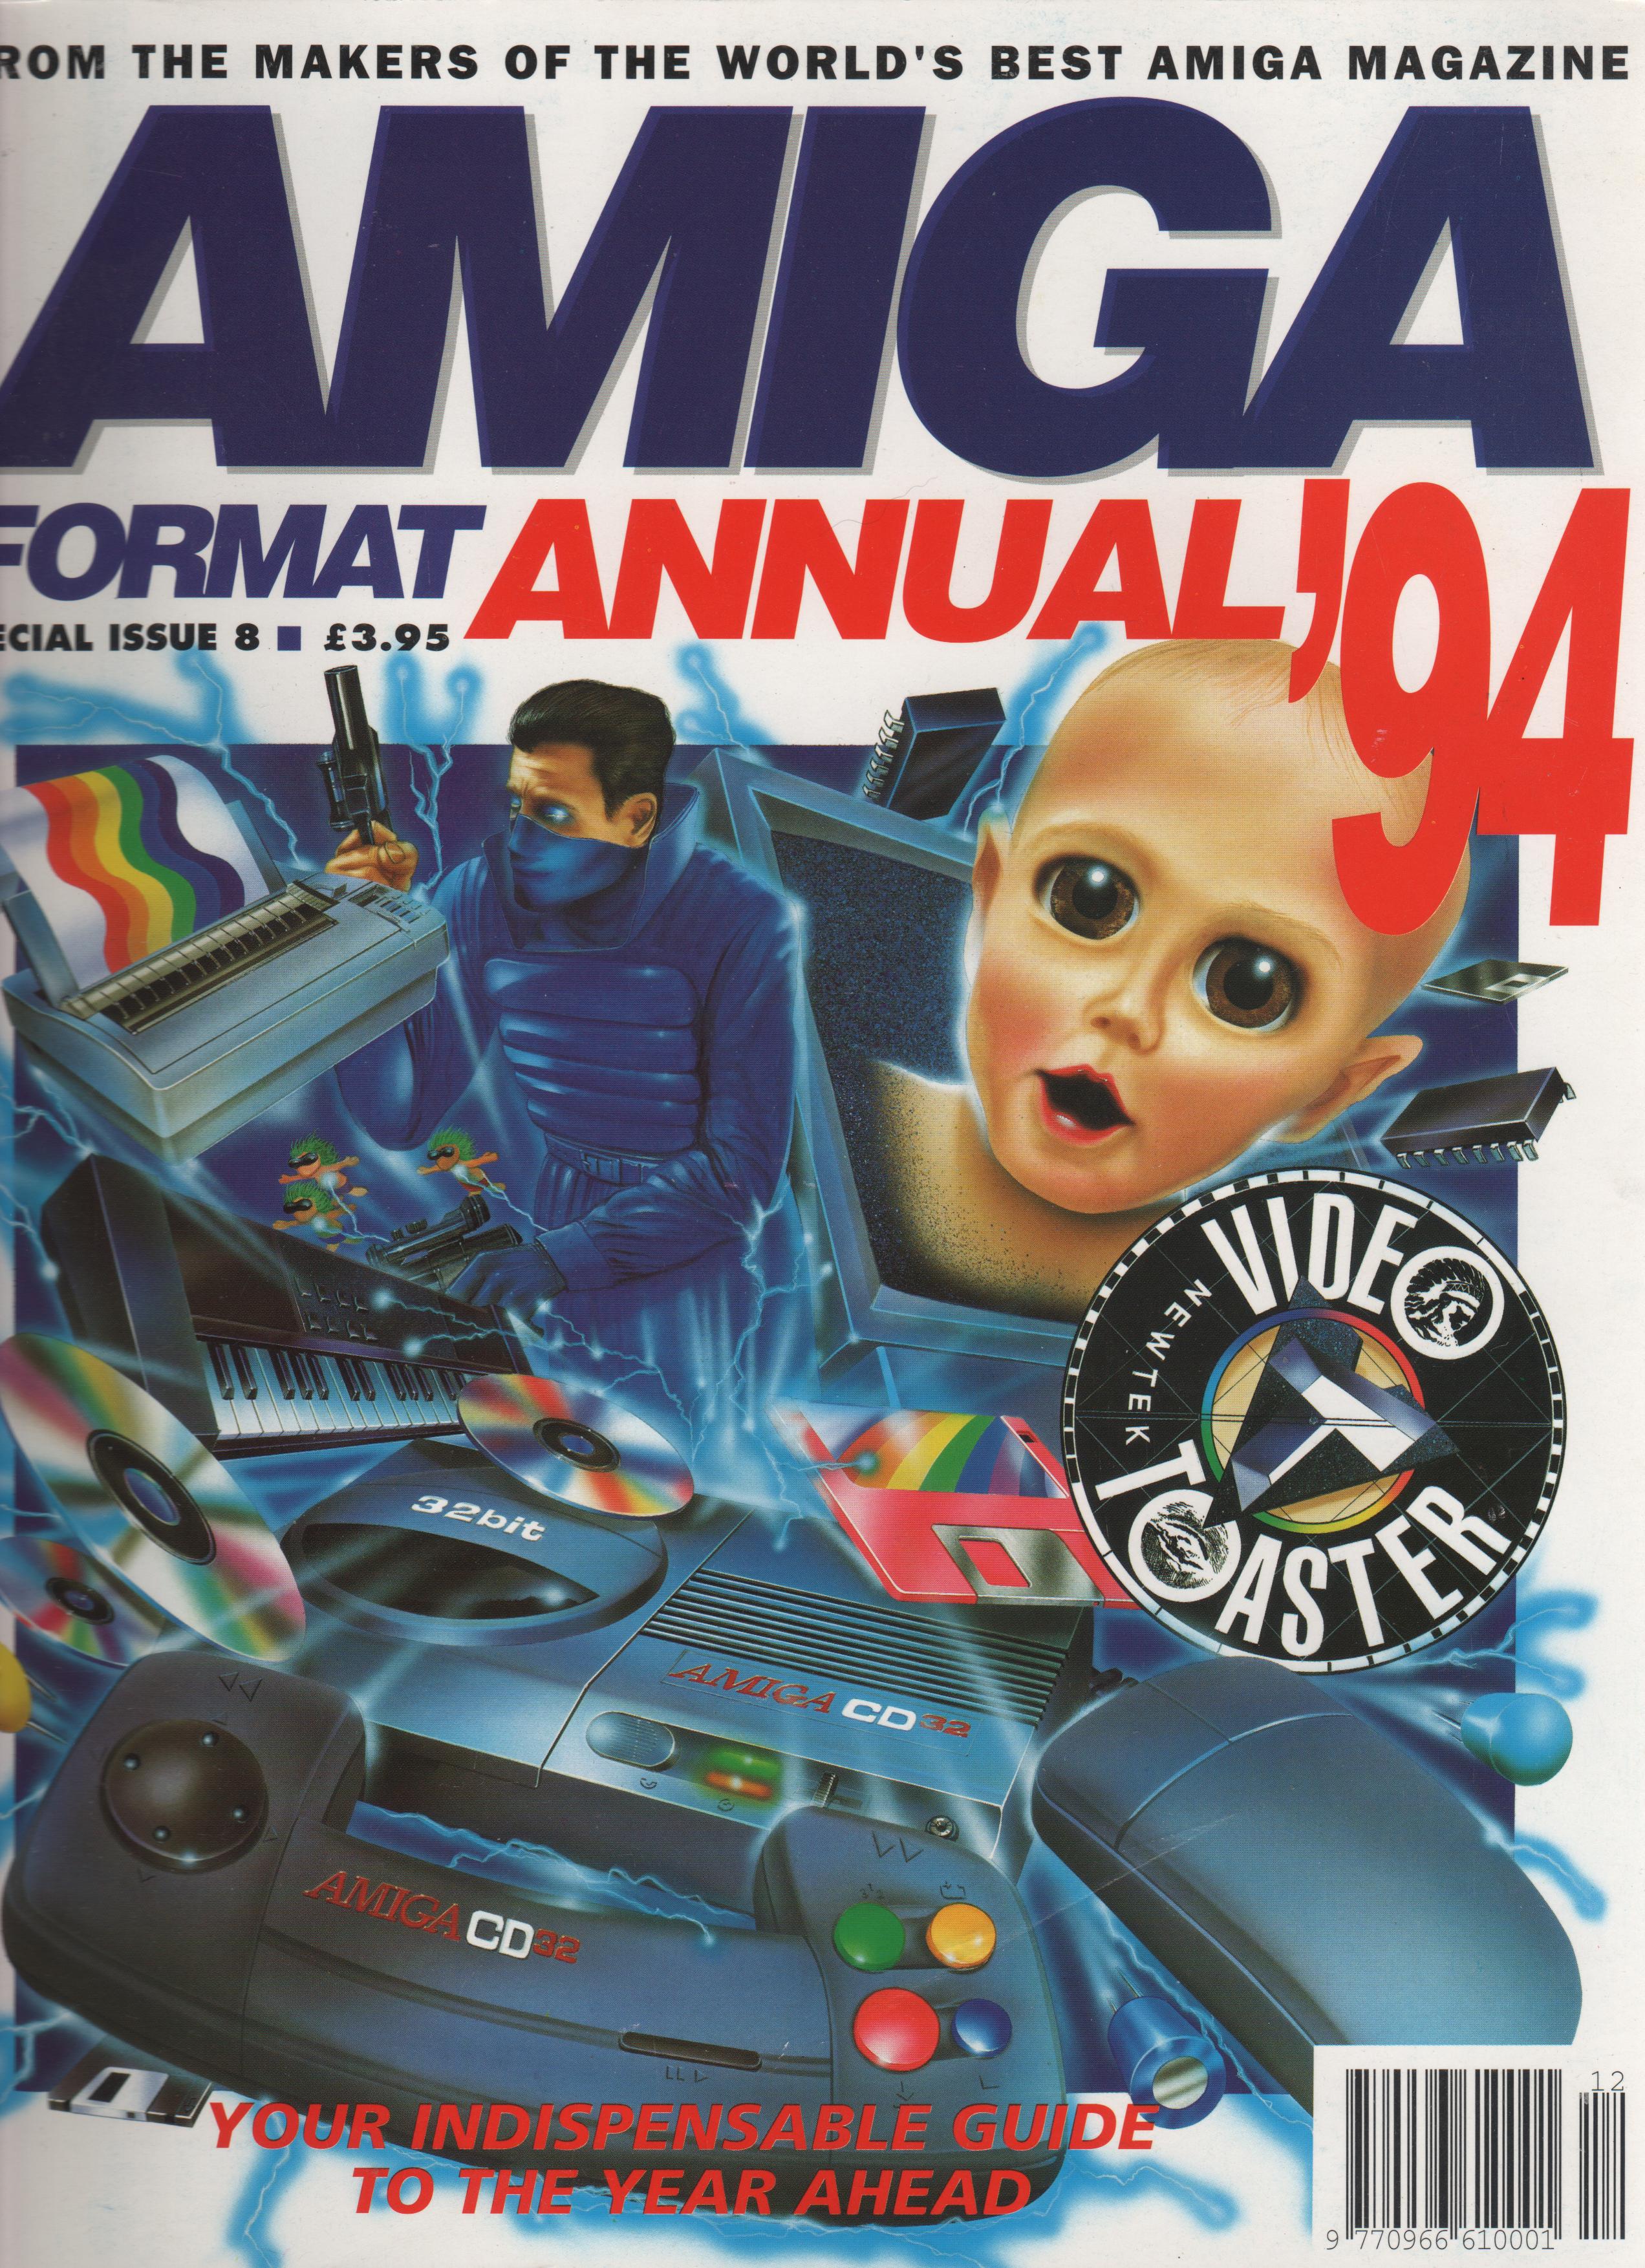 Amiga Format Annual 94 magazine Special Issue 8 | Free download